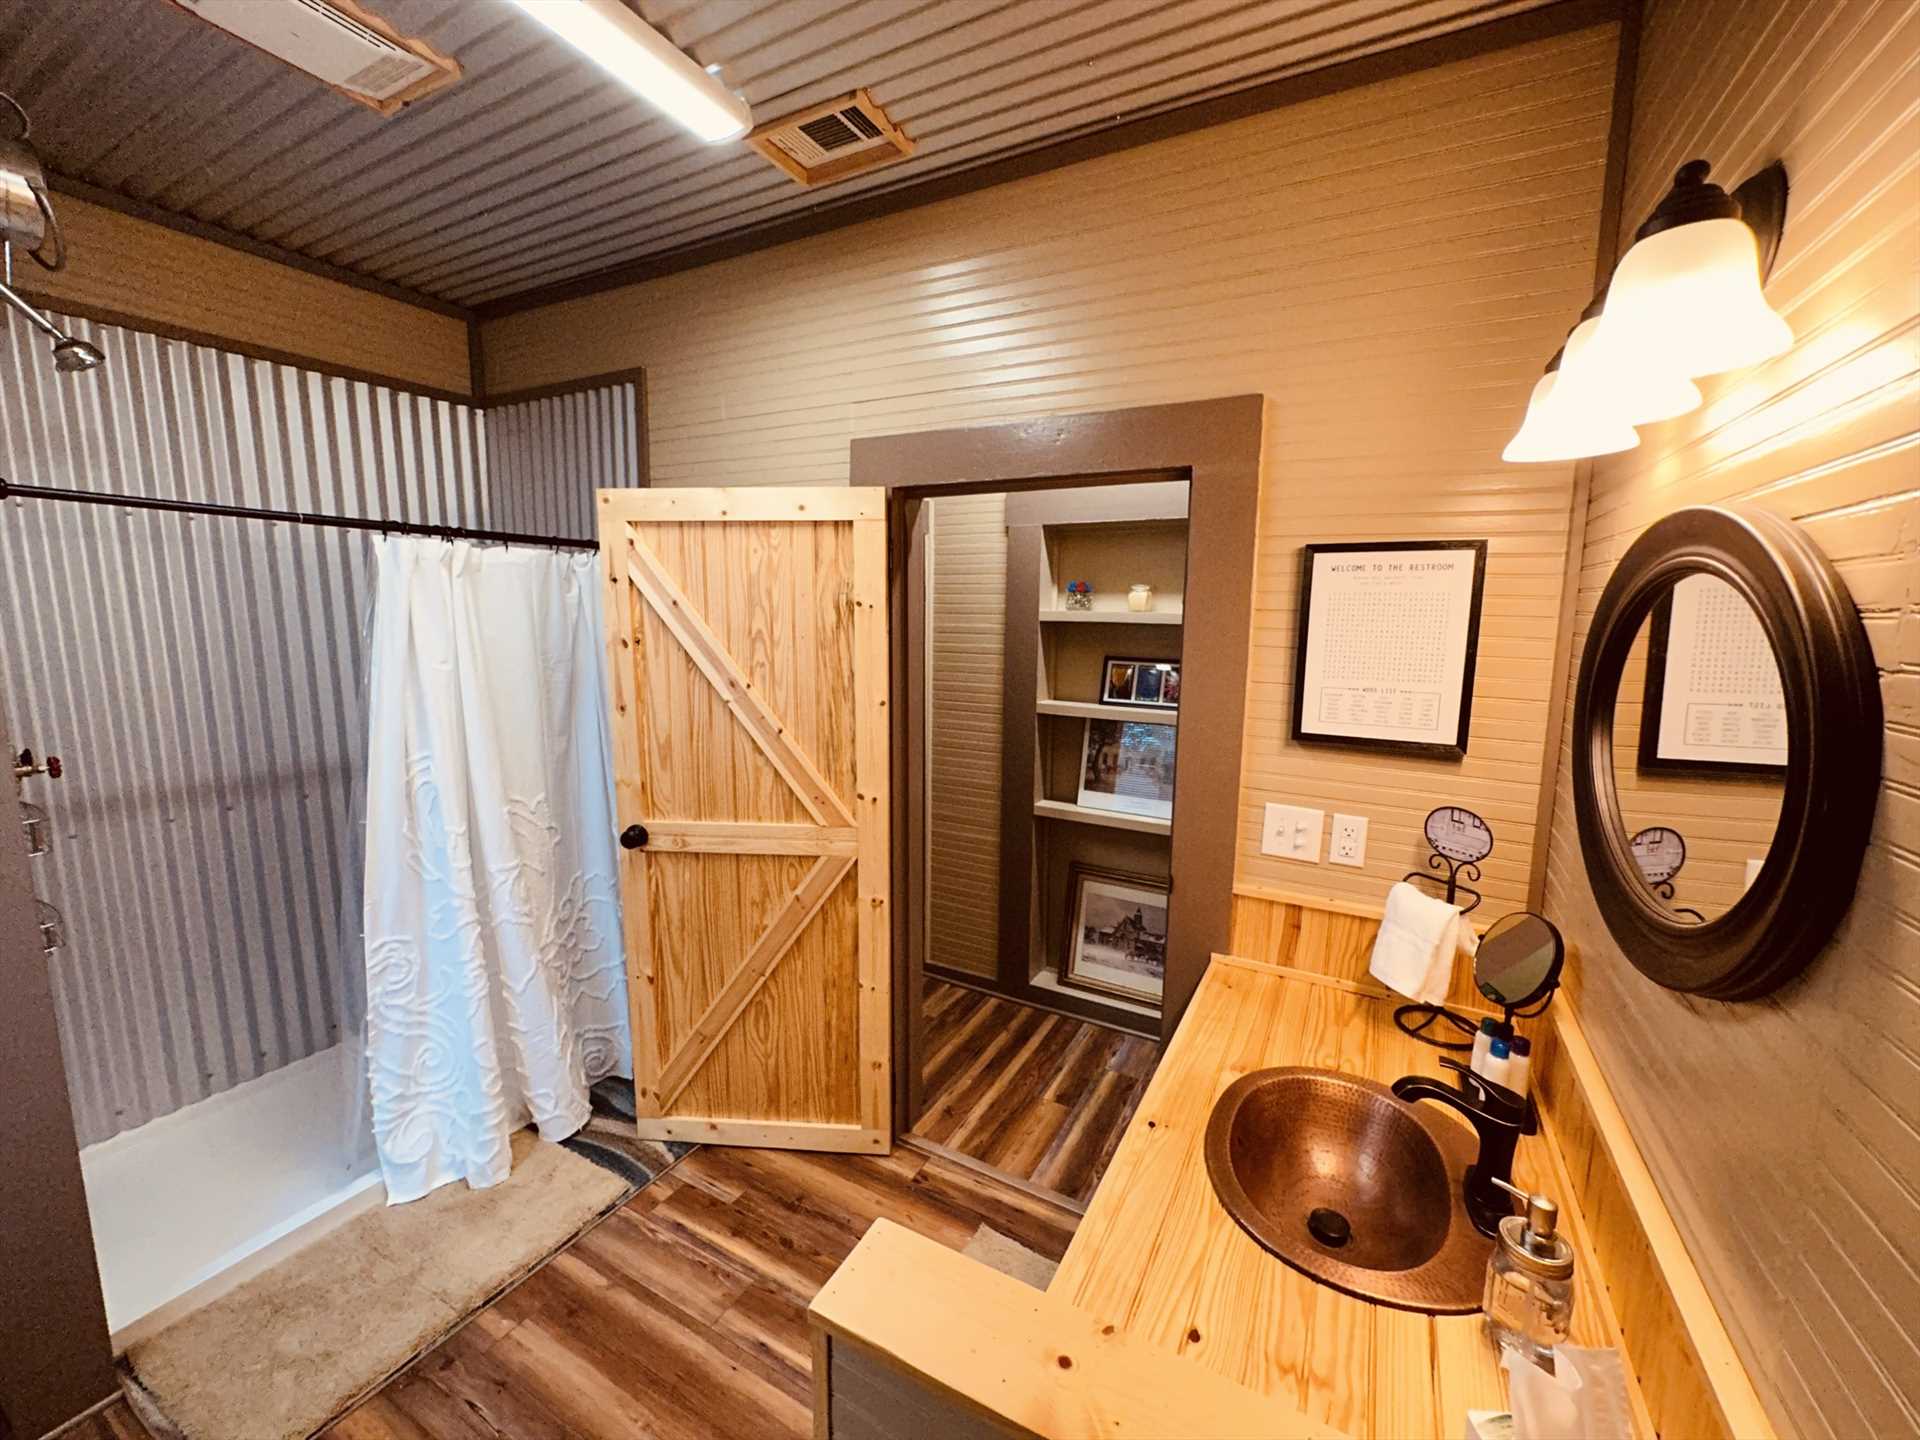                                                 Another highlight of the full bath here is the spacious and neat-as-a-pin shower stall!